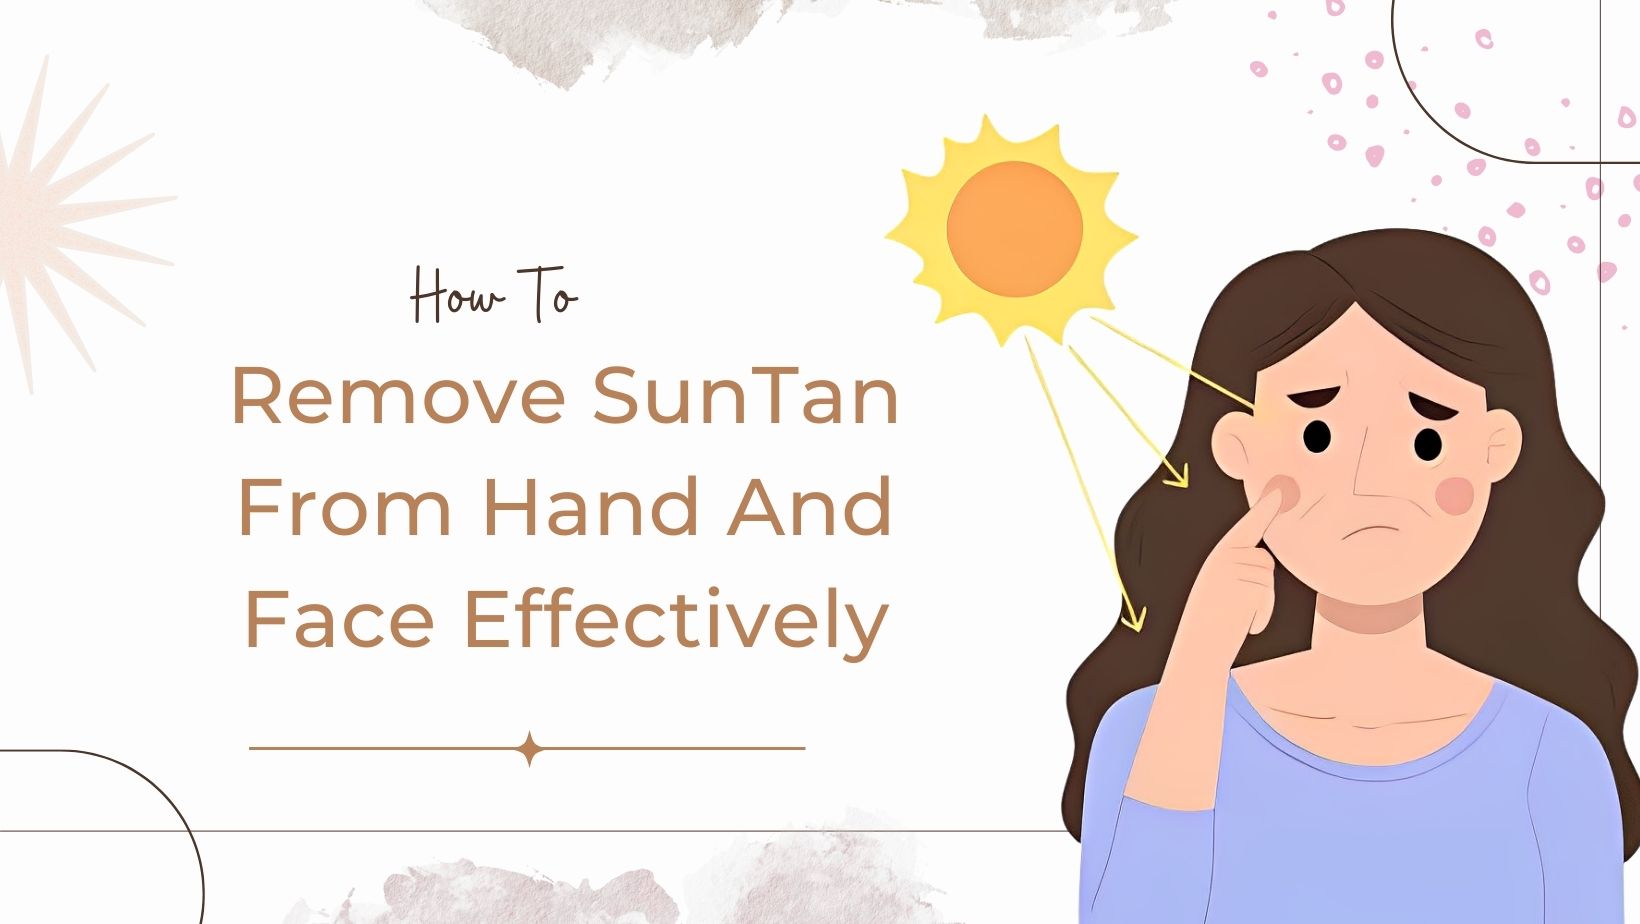 How To Remove Suntan From Hand And Face Effectively